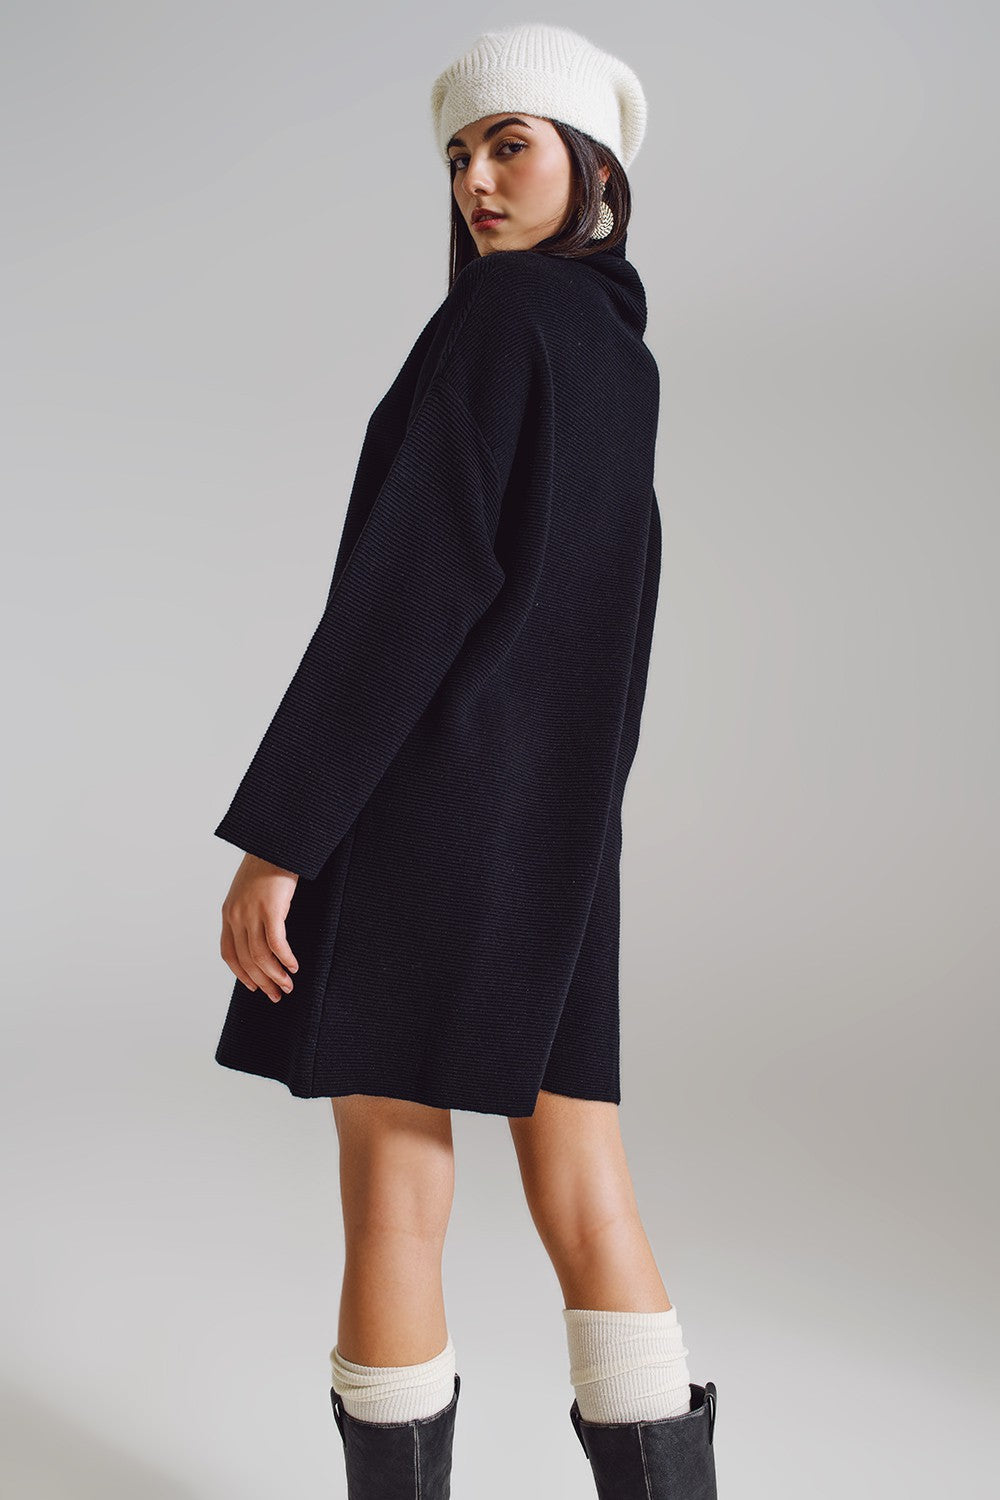 BLACK HIGH NECK STRAIGHT STYLE KNITTED DRESS